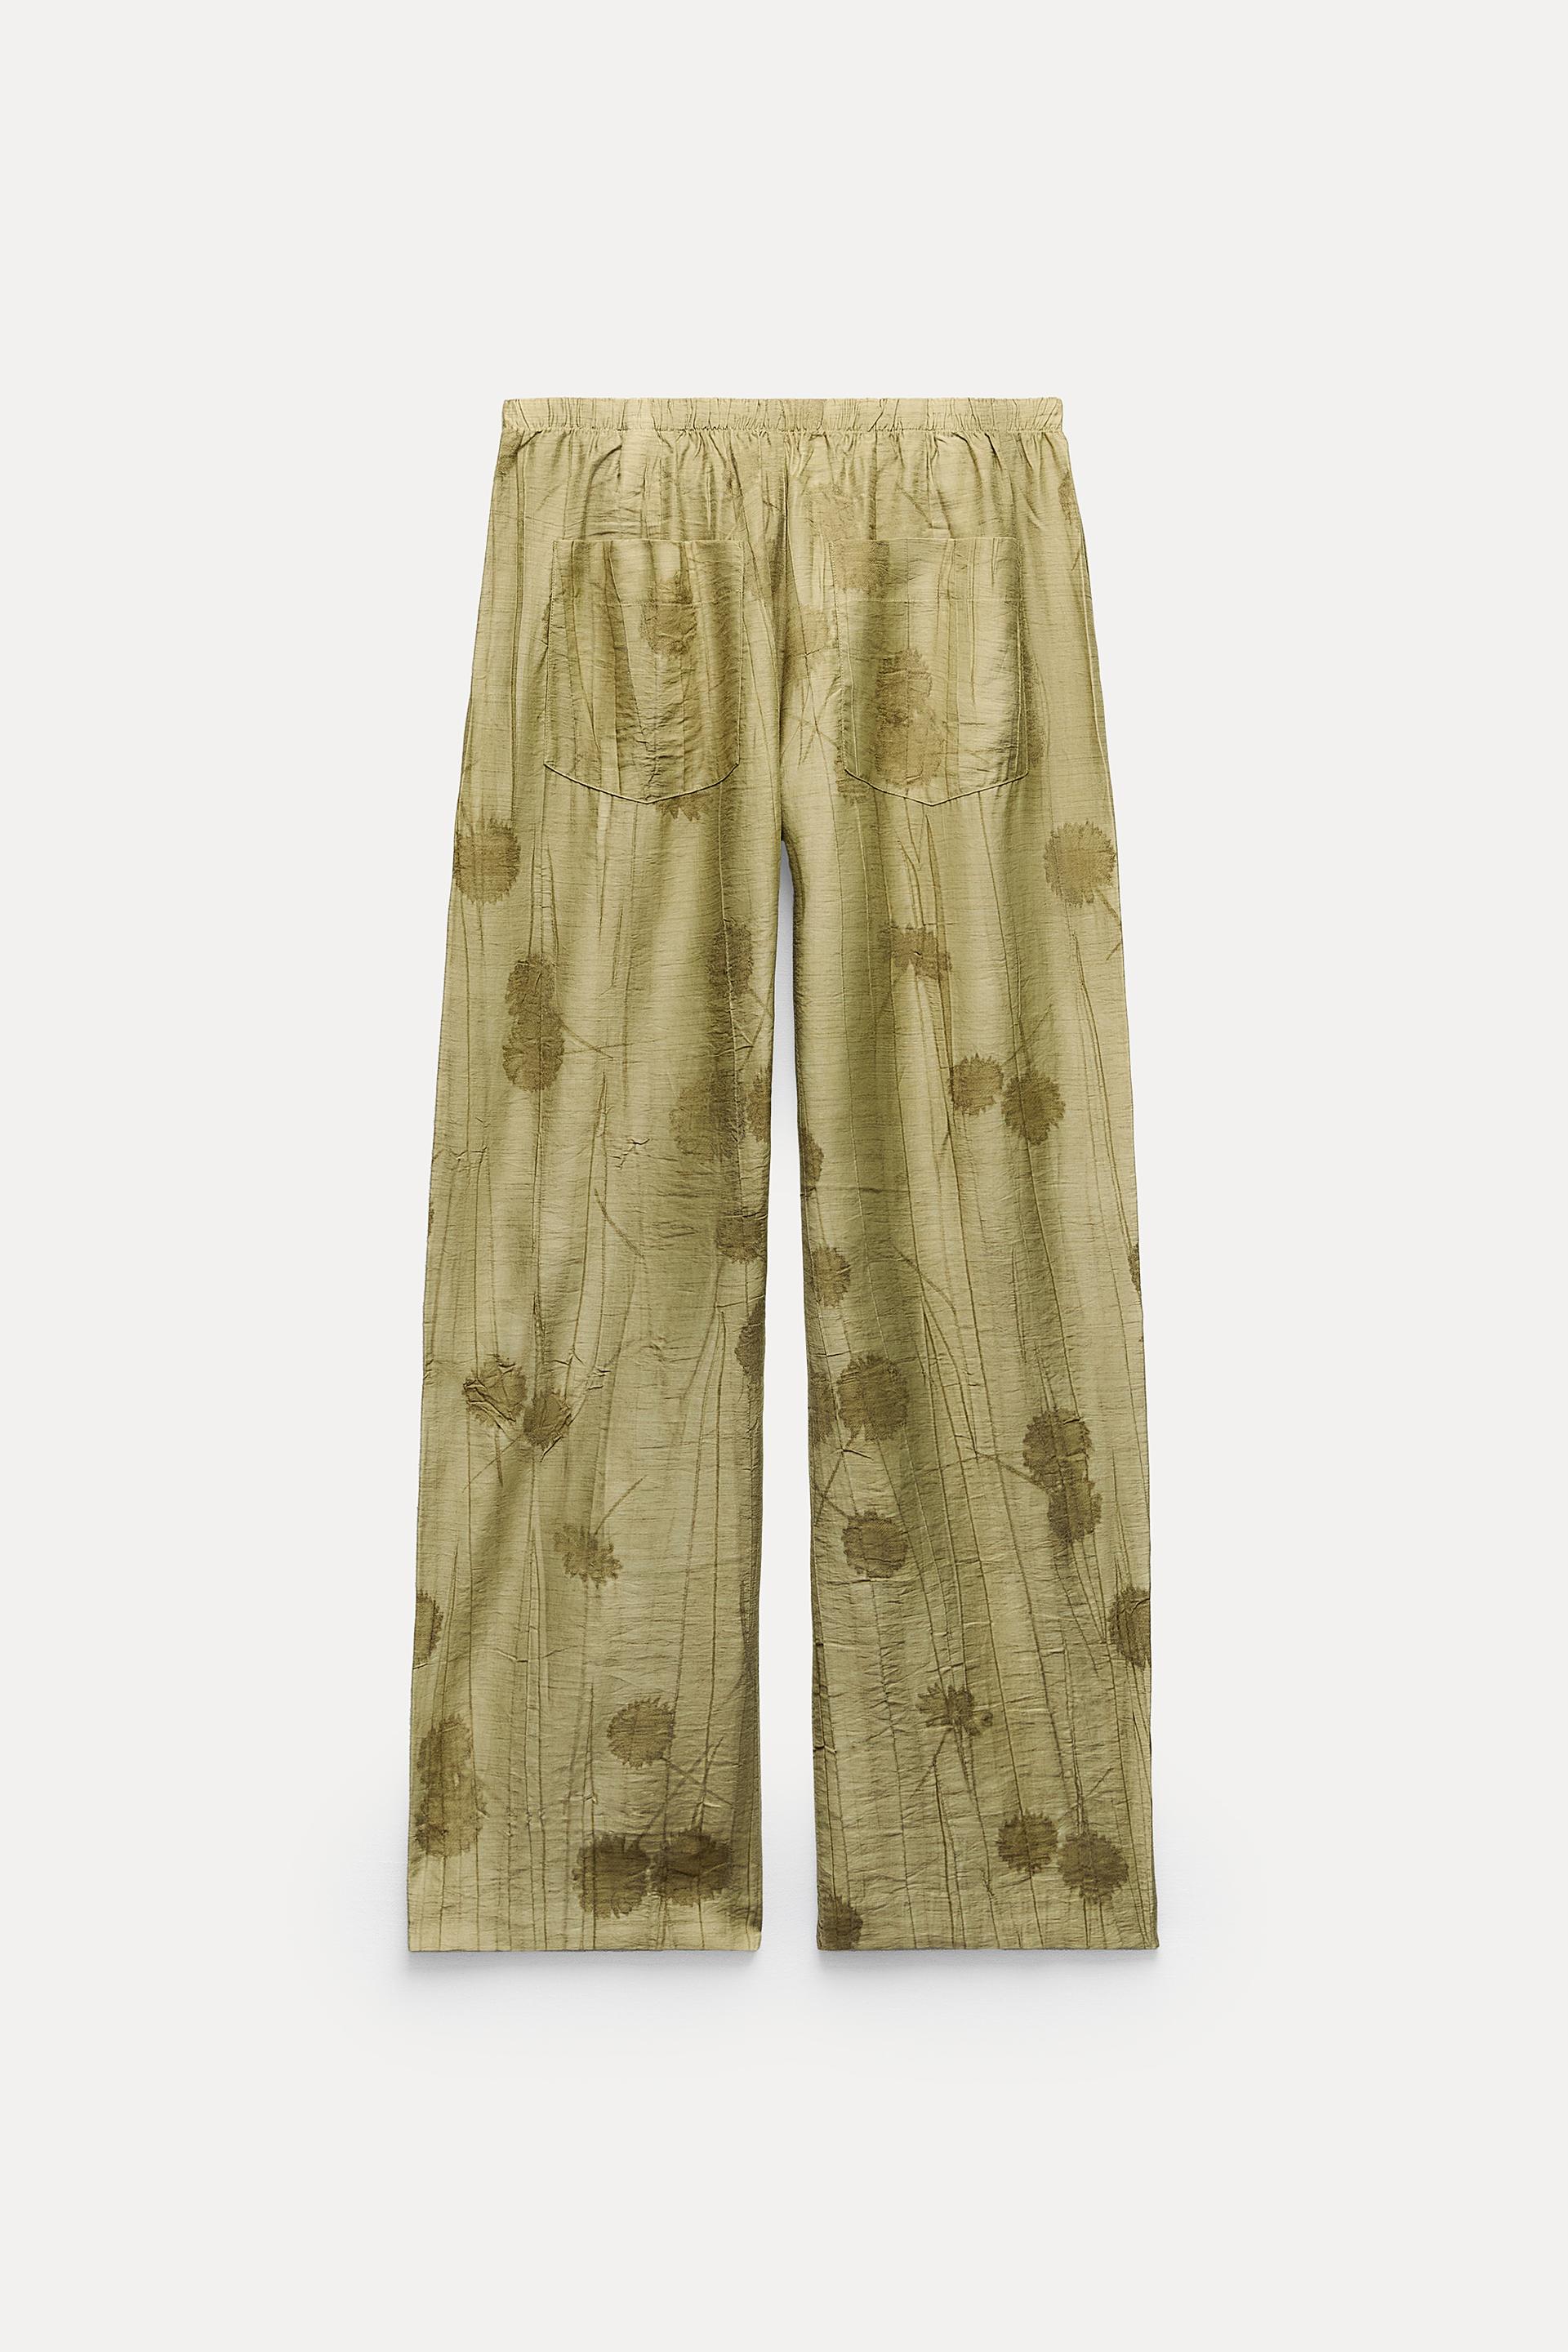 JACQUARD PANTS ZW COLLECTION - Olive green